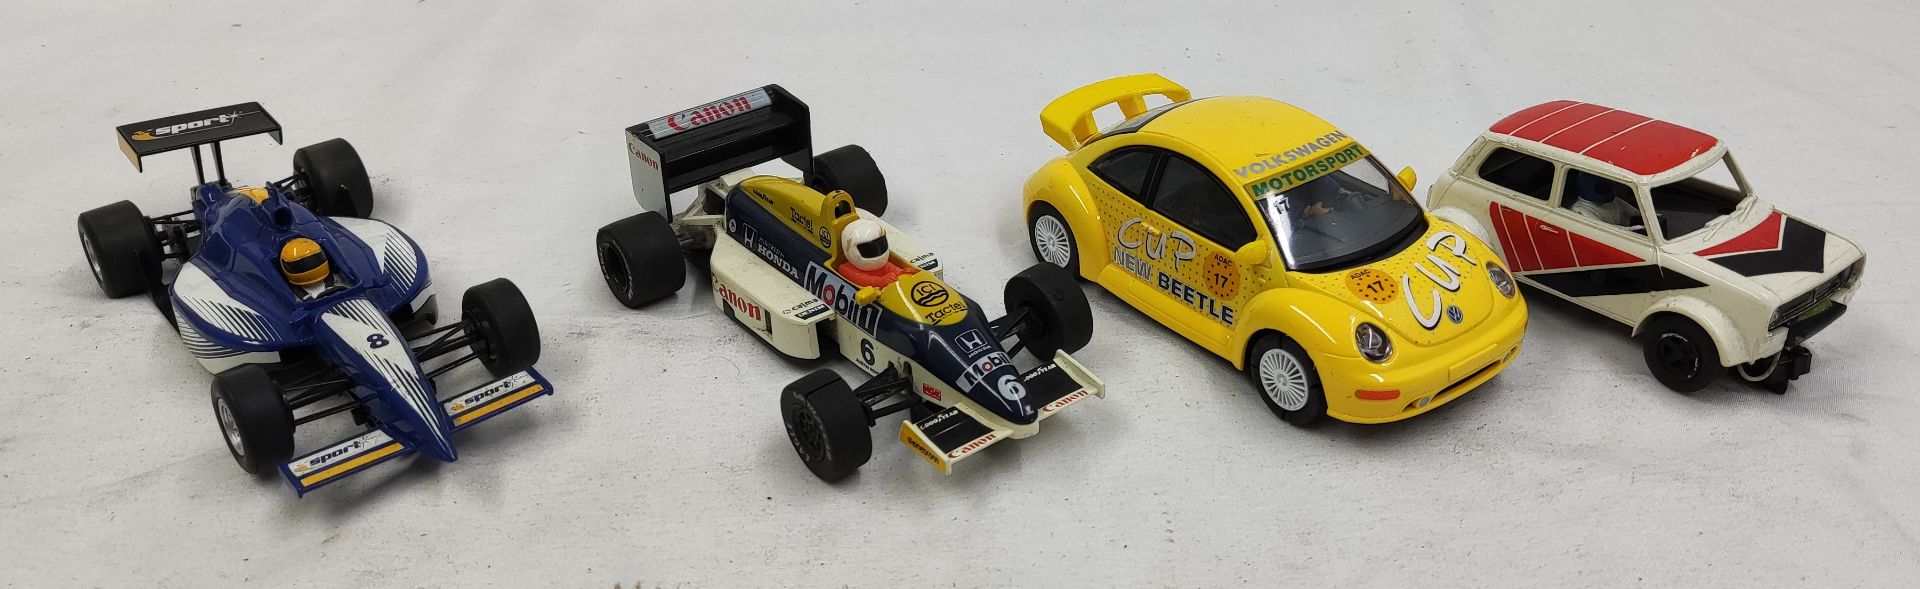 4 x Scalextric Cars Including VW Beetle, F1 Car, Open Wheeler and Mini Clubman 1275GT - Tested and - Image 8 of 11